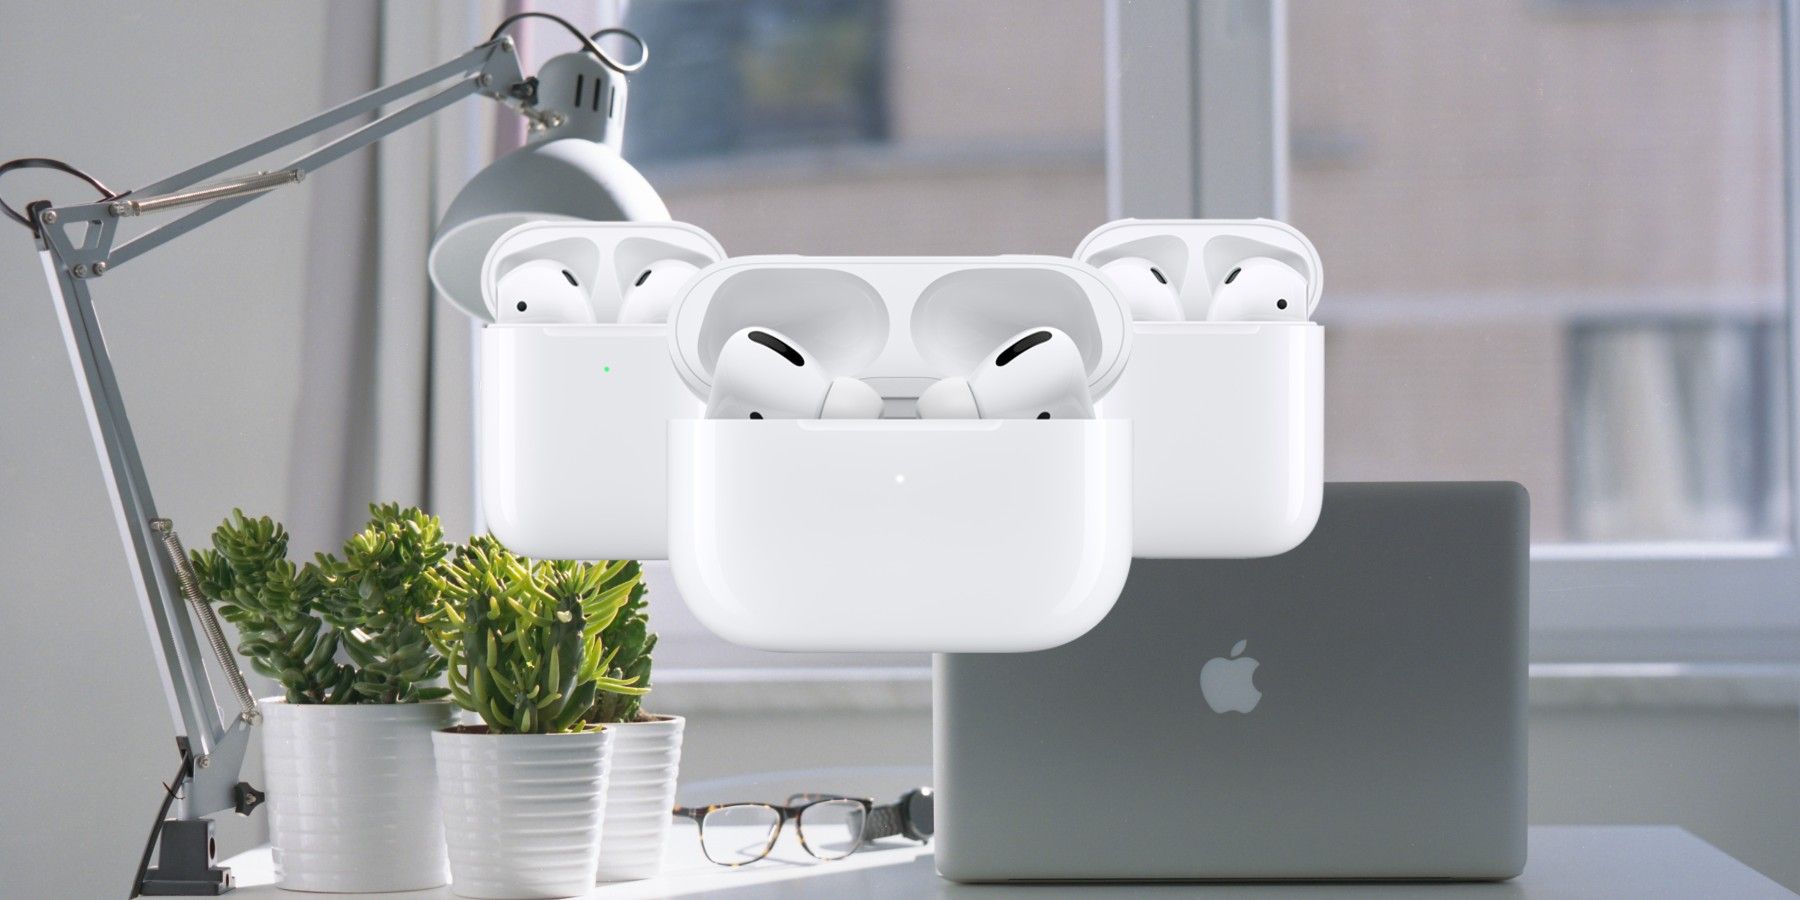 Airpods in front of a MacBook